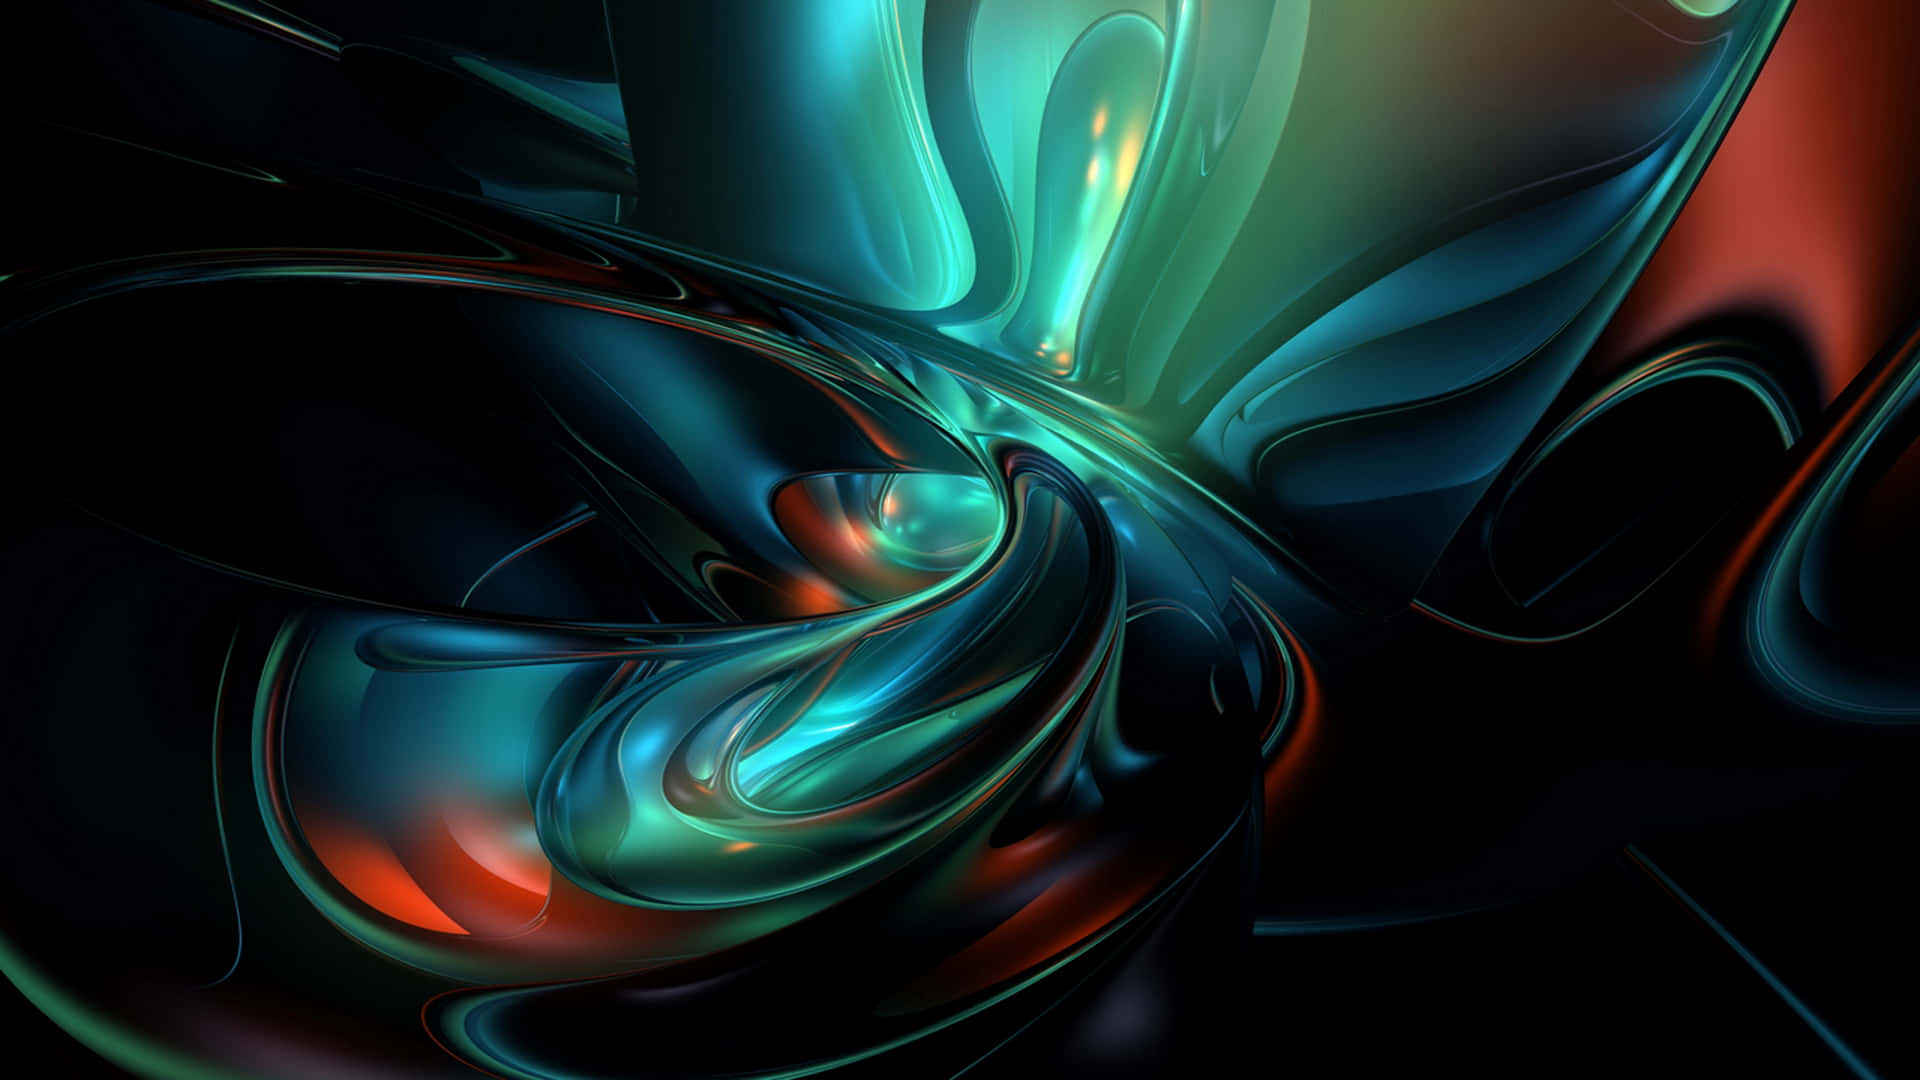 Abstract Art With Several Swirls Wallpaper